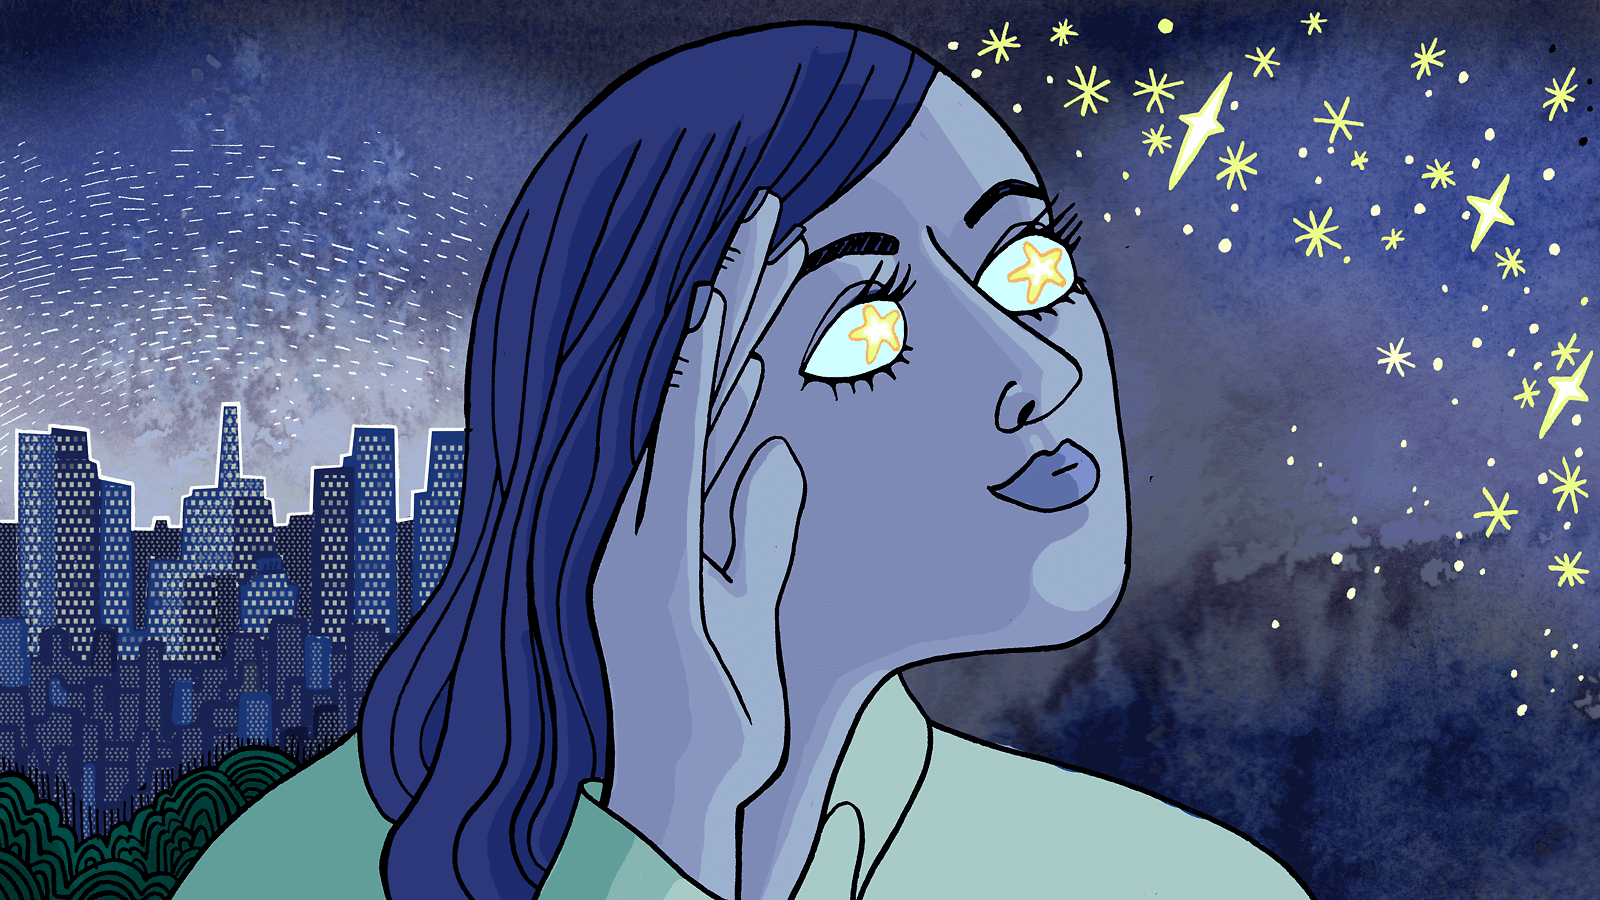 Cityscape background, woman with stars in her eyes looks on towards the stars